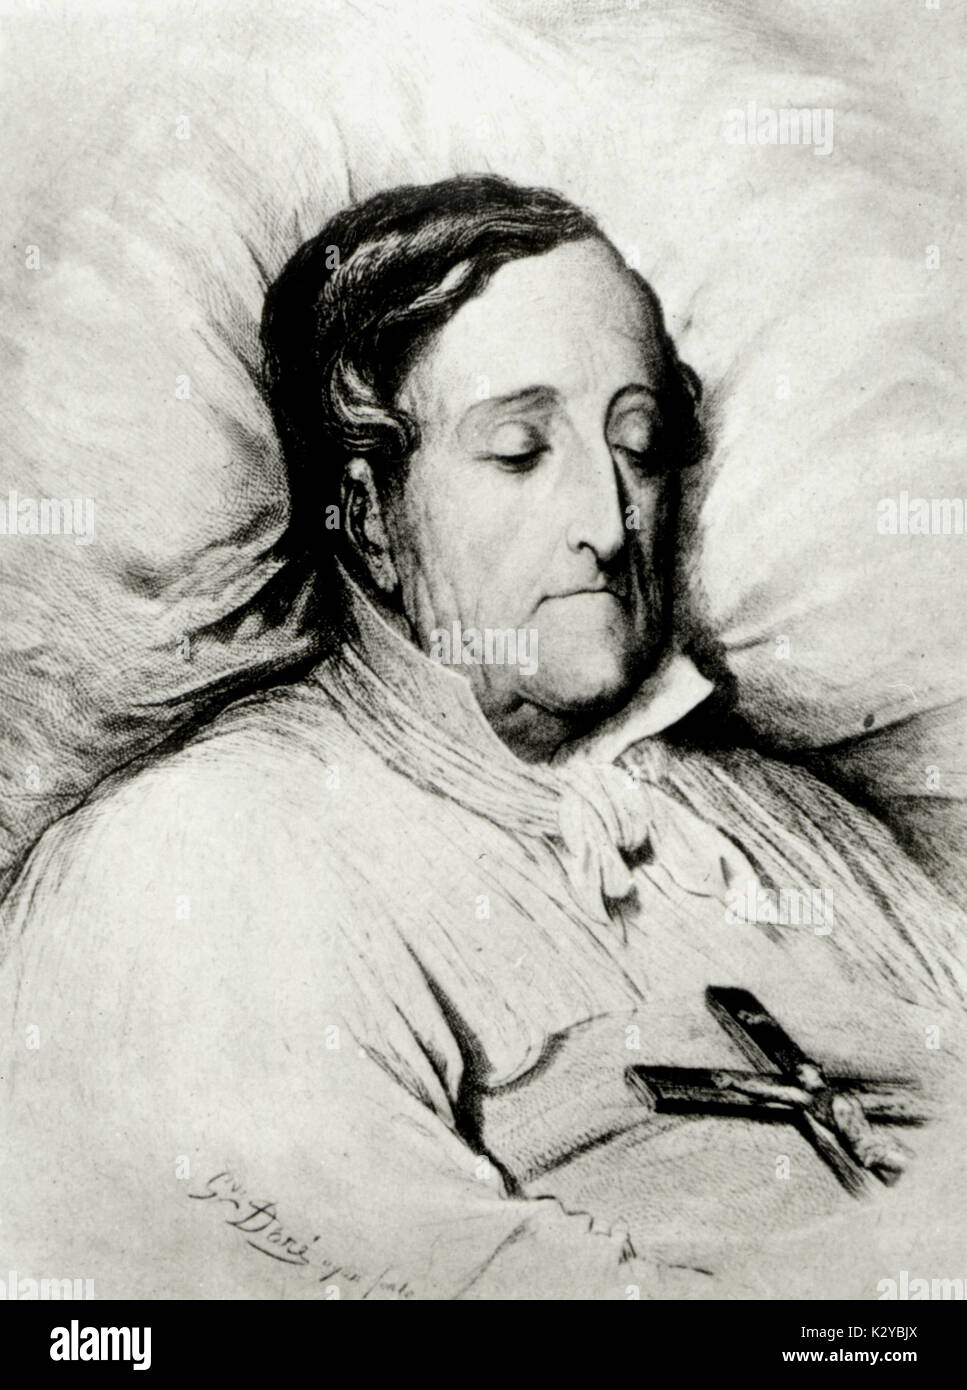 ROSSINI, on his death bed by Gustav Doré Italian composer (1792-1868) Stock Photo